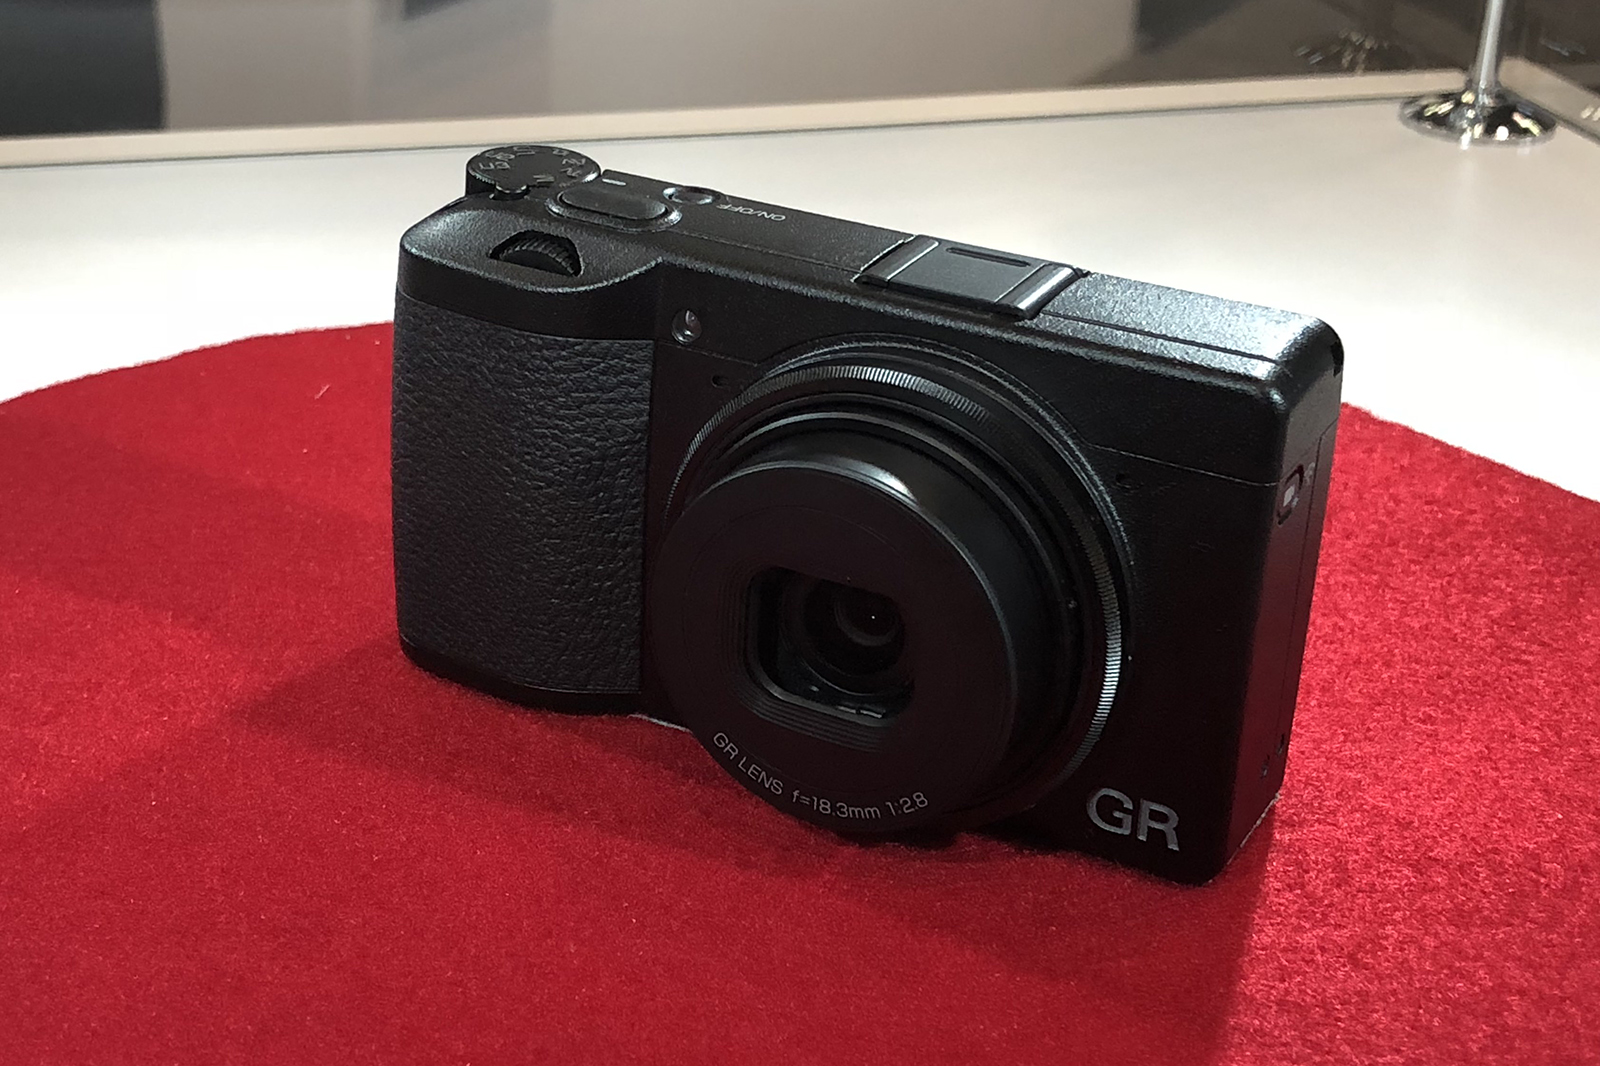 ricoh shows off upcoming gr iii advanced compact with 3 axis stabilization image 6